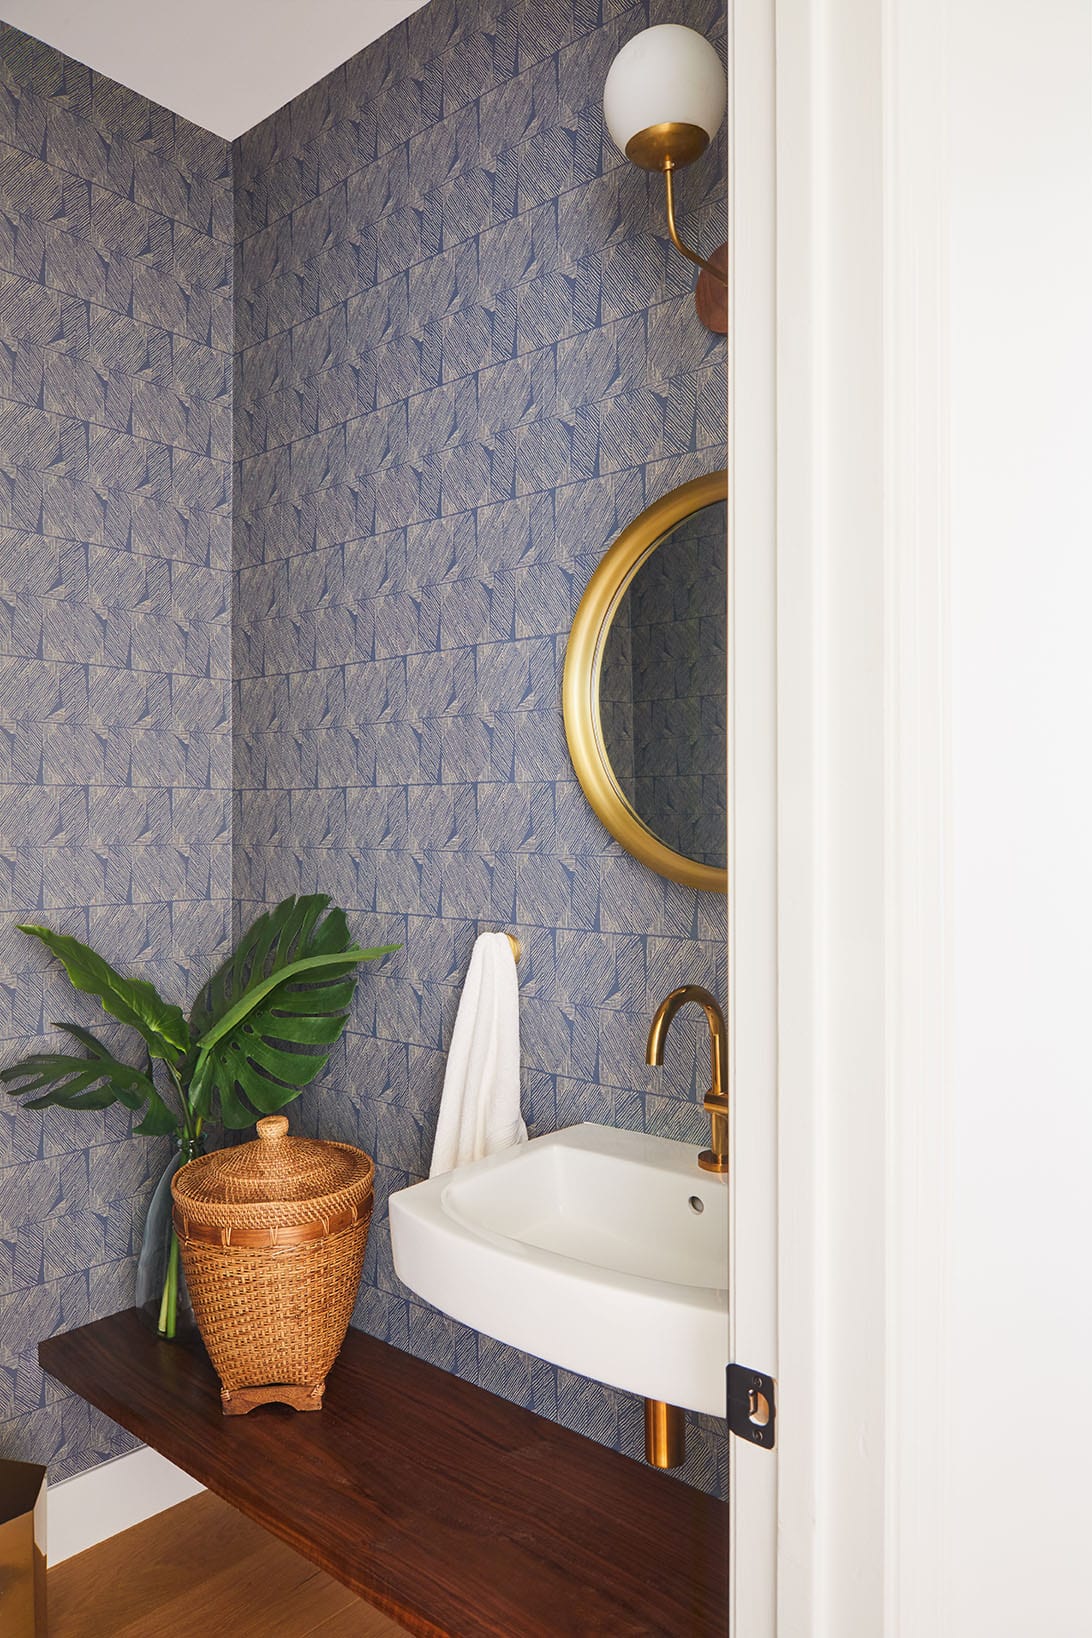 5 Reasons To Use Wallpaper In Your Space